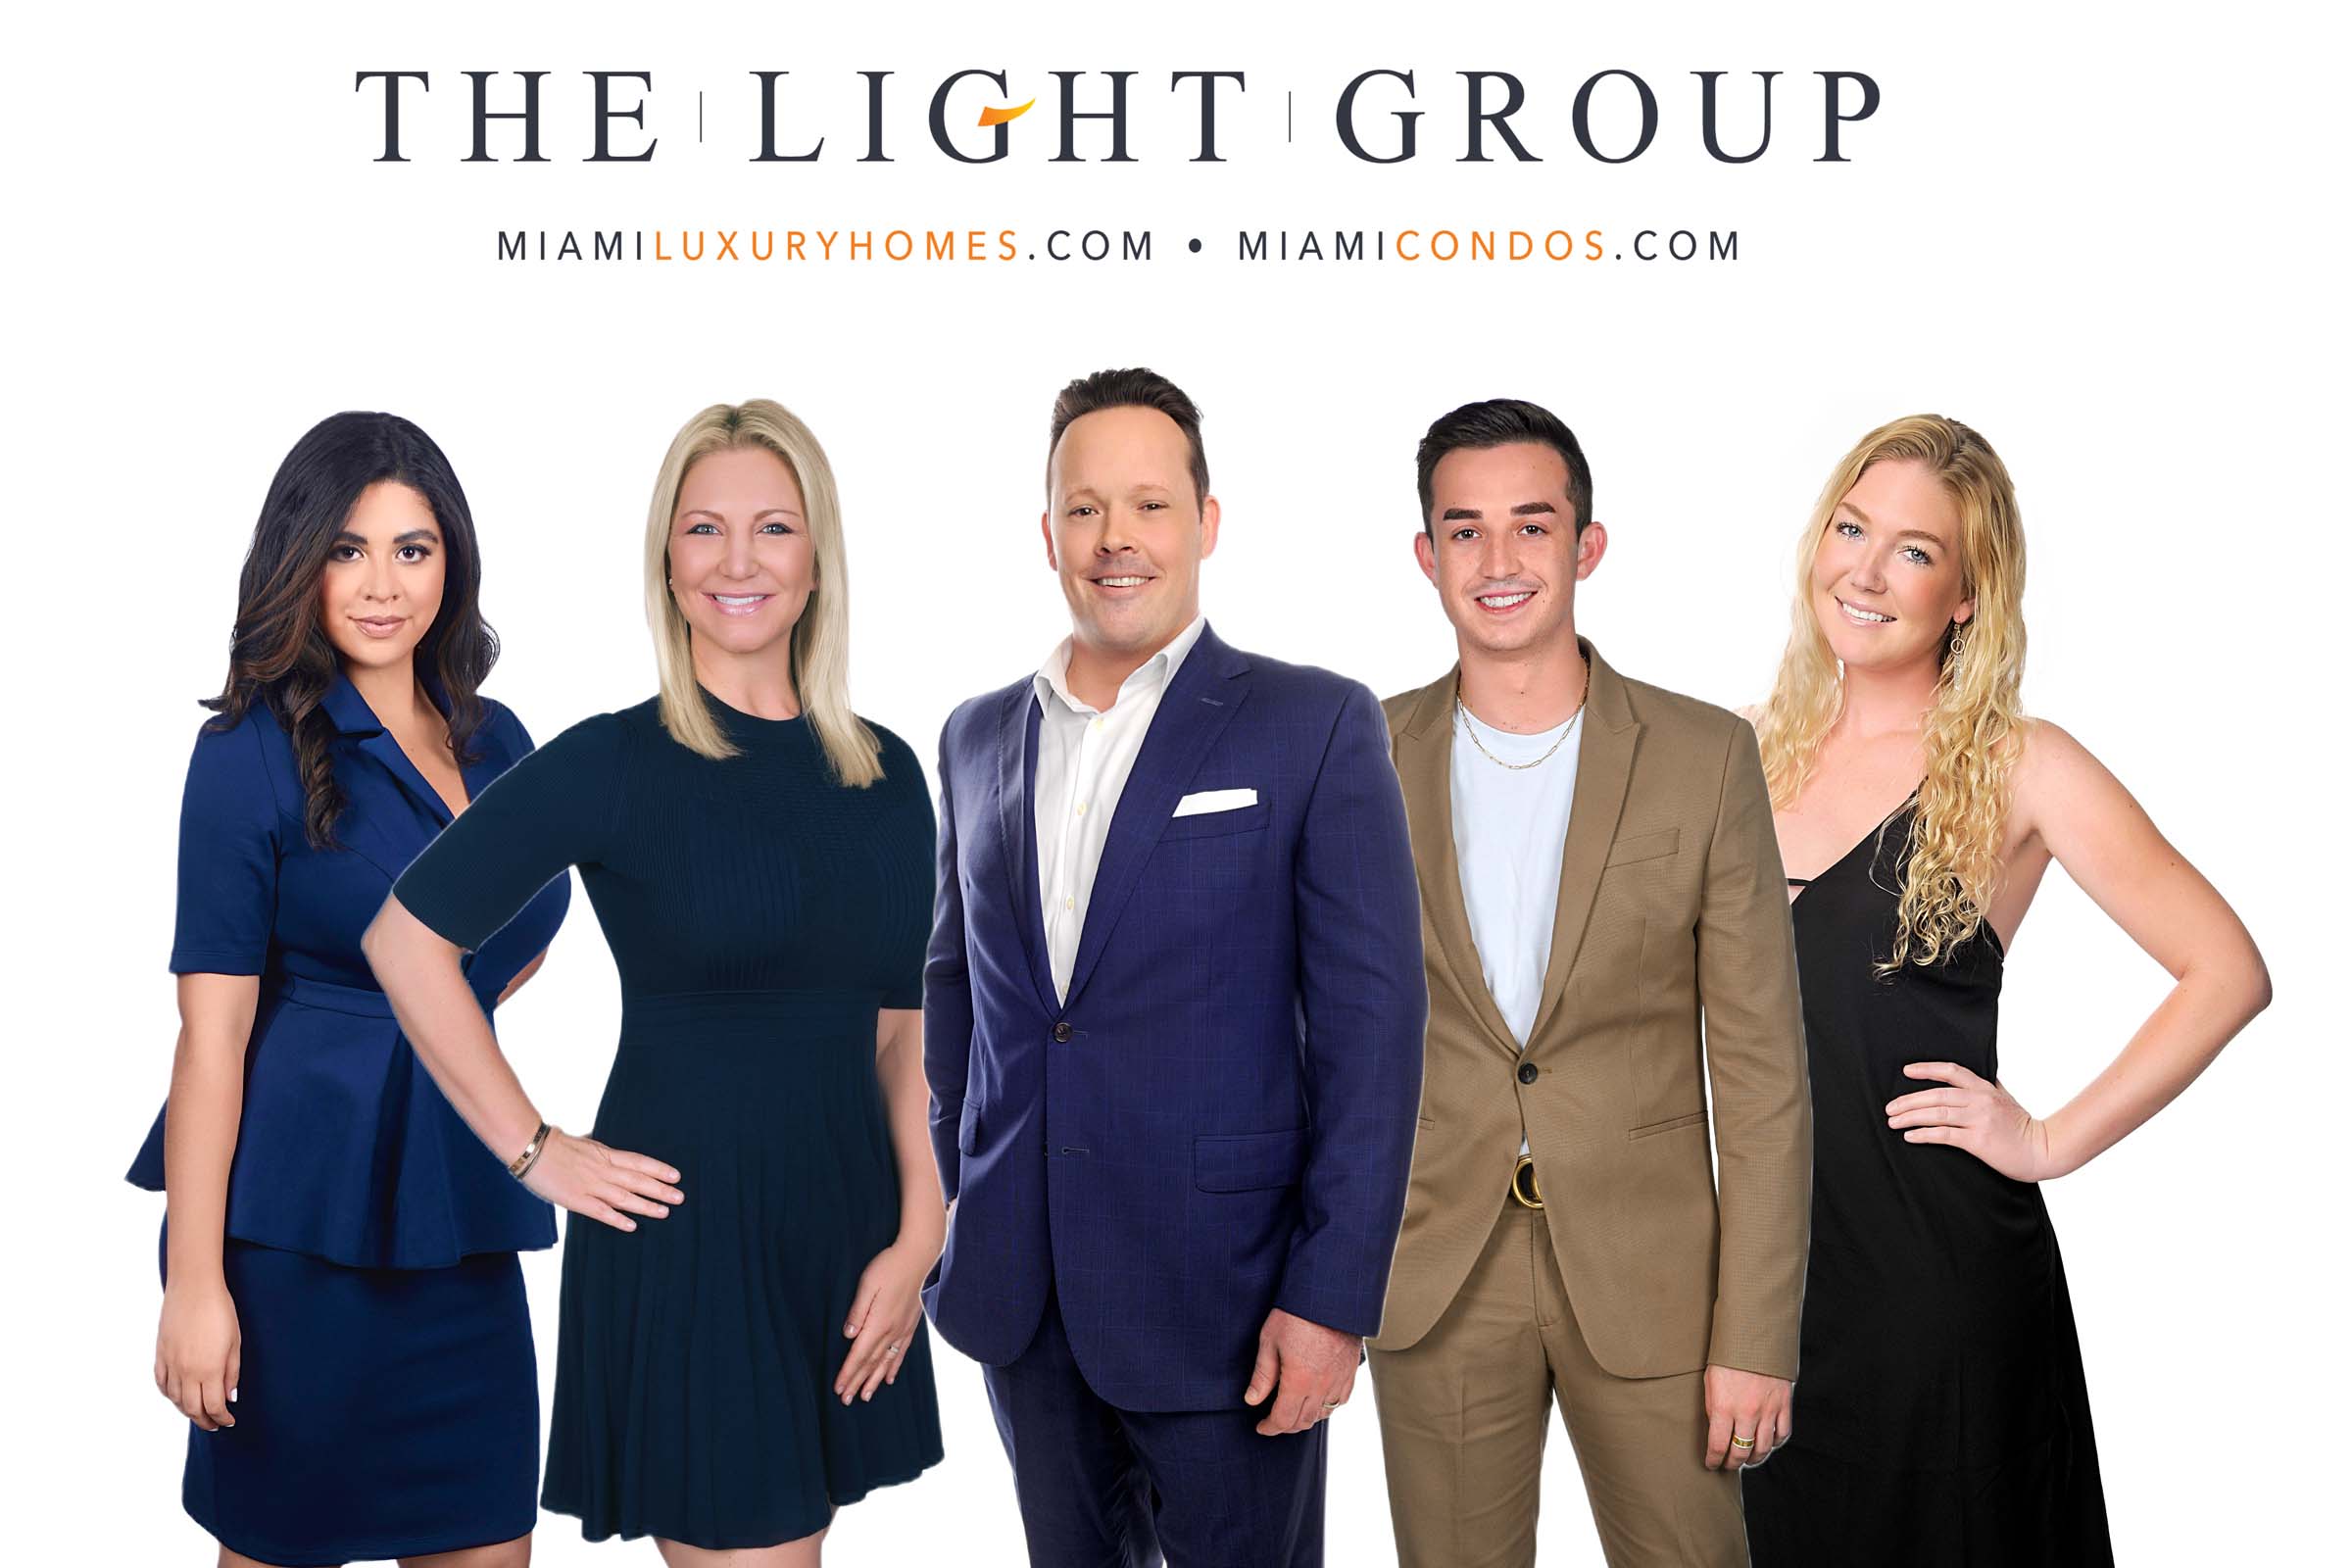 The Light Group at Douglas Elliman Expands | Welcomes New Team Members